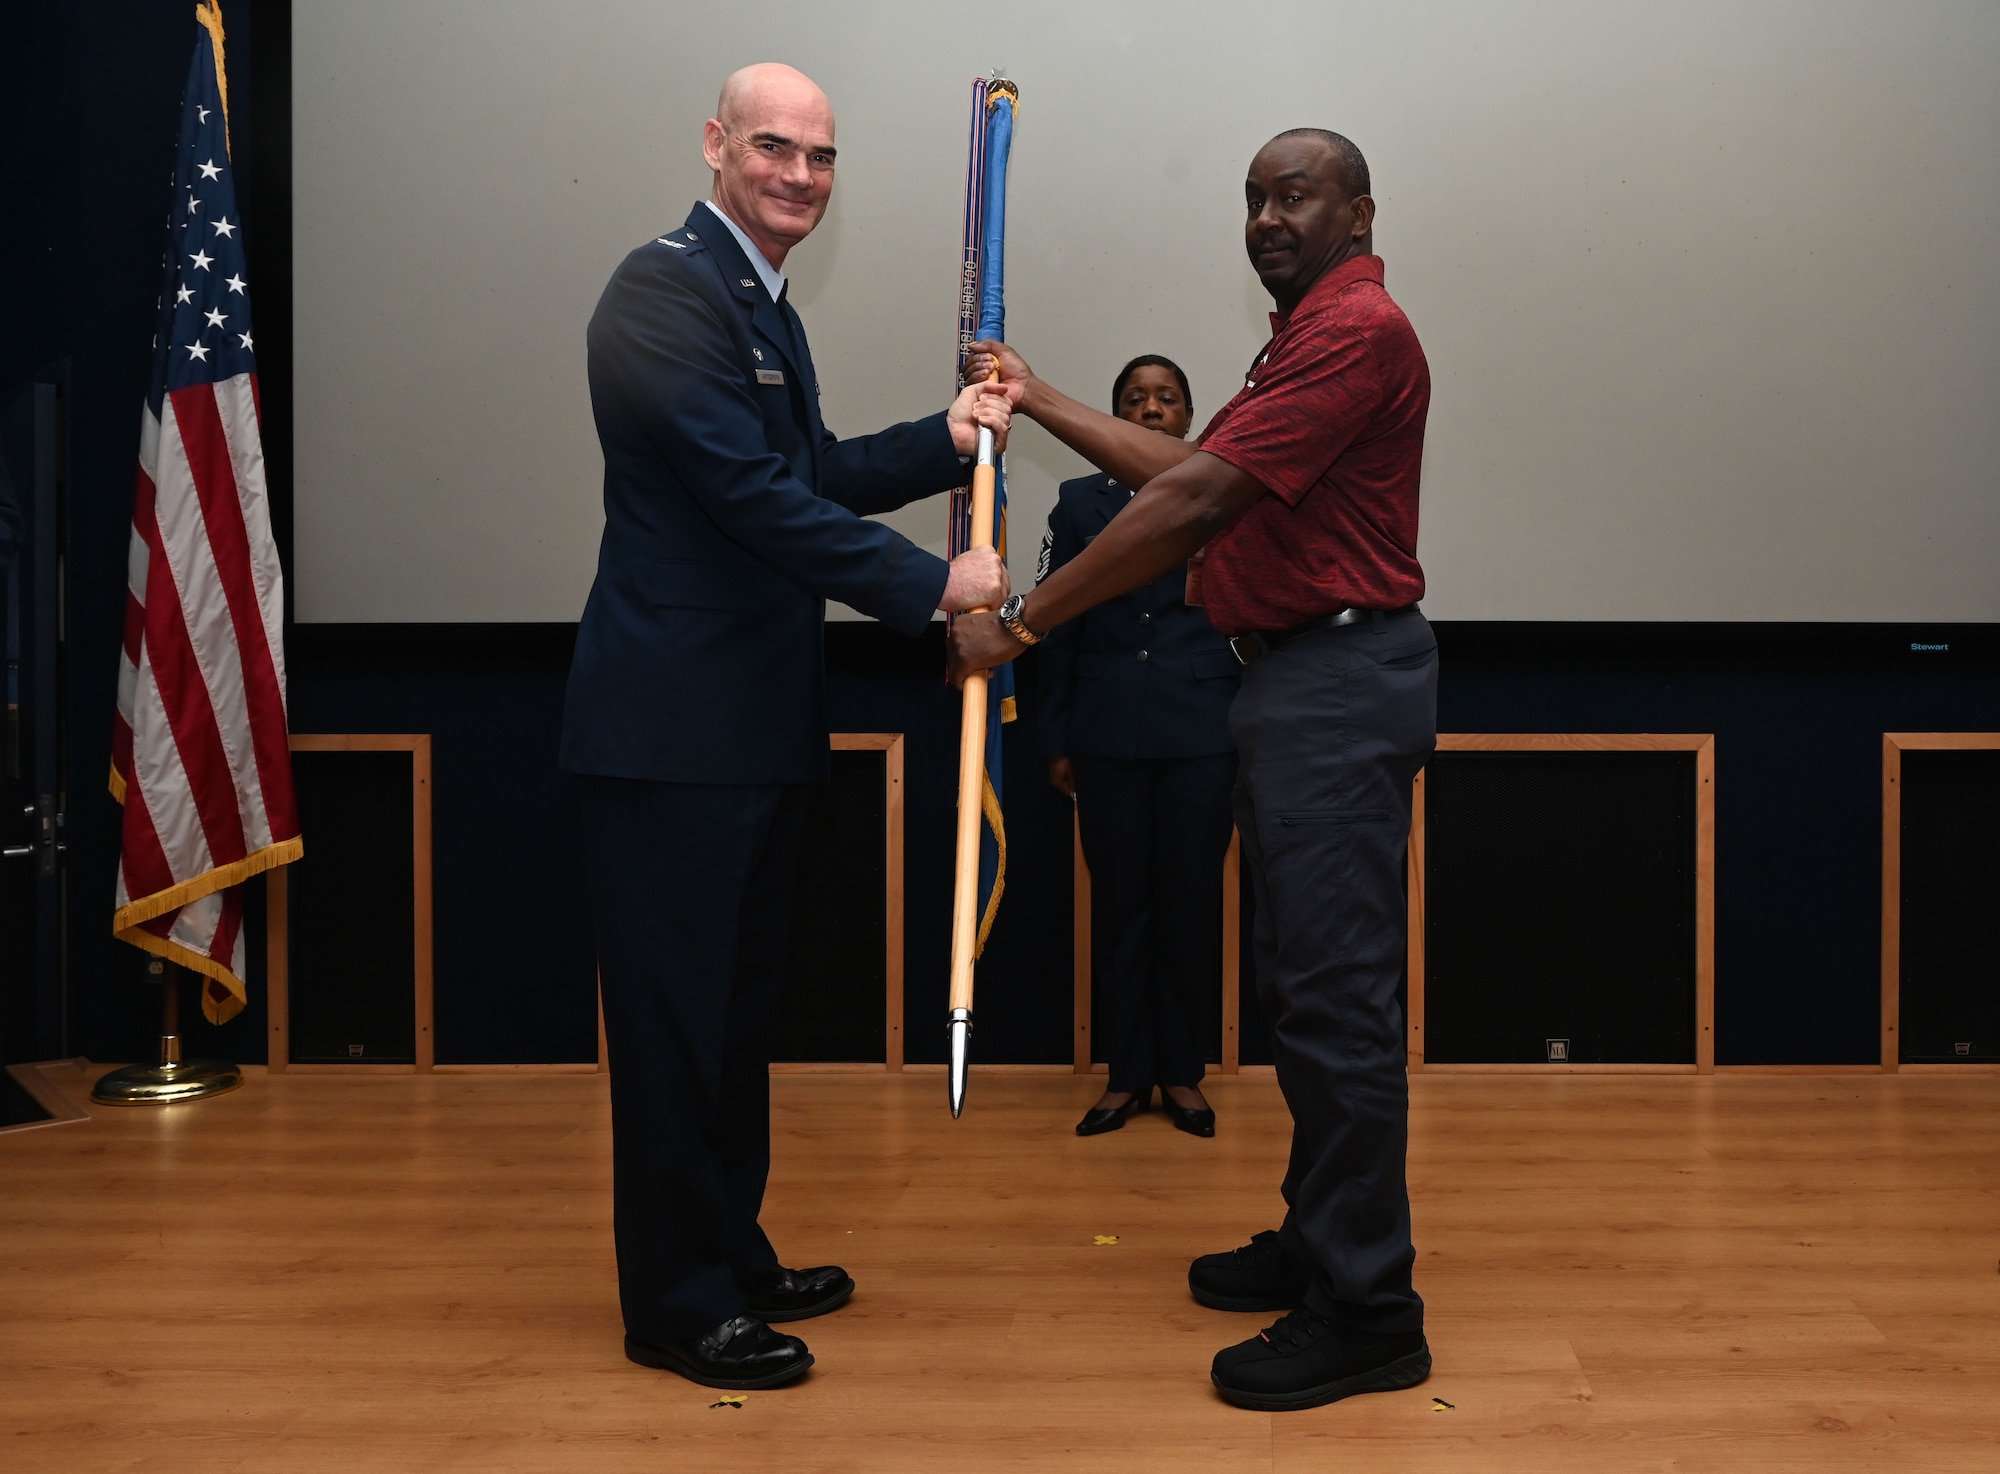 Col. William Gutermuth, 433rd Airlift Wing commander, hands the 433rd AW guidon to Larry McHenry, Chief Executive Office for Power Grid Professional Incorporated, during the Honorary Commanders’ Induction Ceremony on Joint Base San Antonio-Lackland, Texas, Oct. 15, 2023. Honorary commanders have opportunities to learn about their units and commanders through C-5M Super Galaxy tours, demonstrations, events and flights.